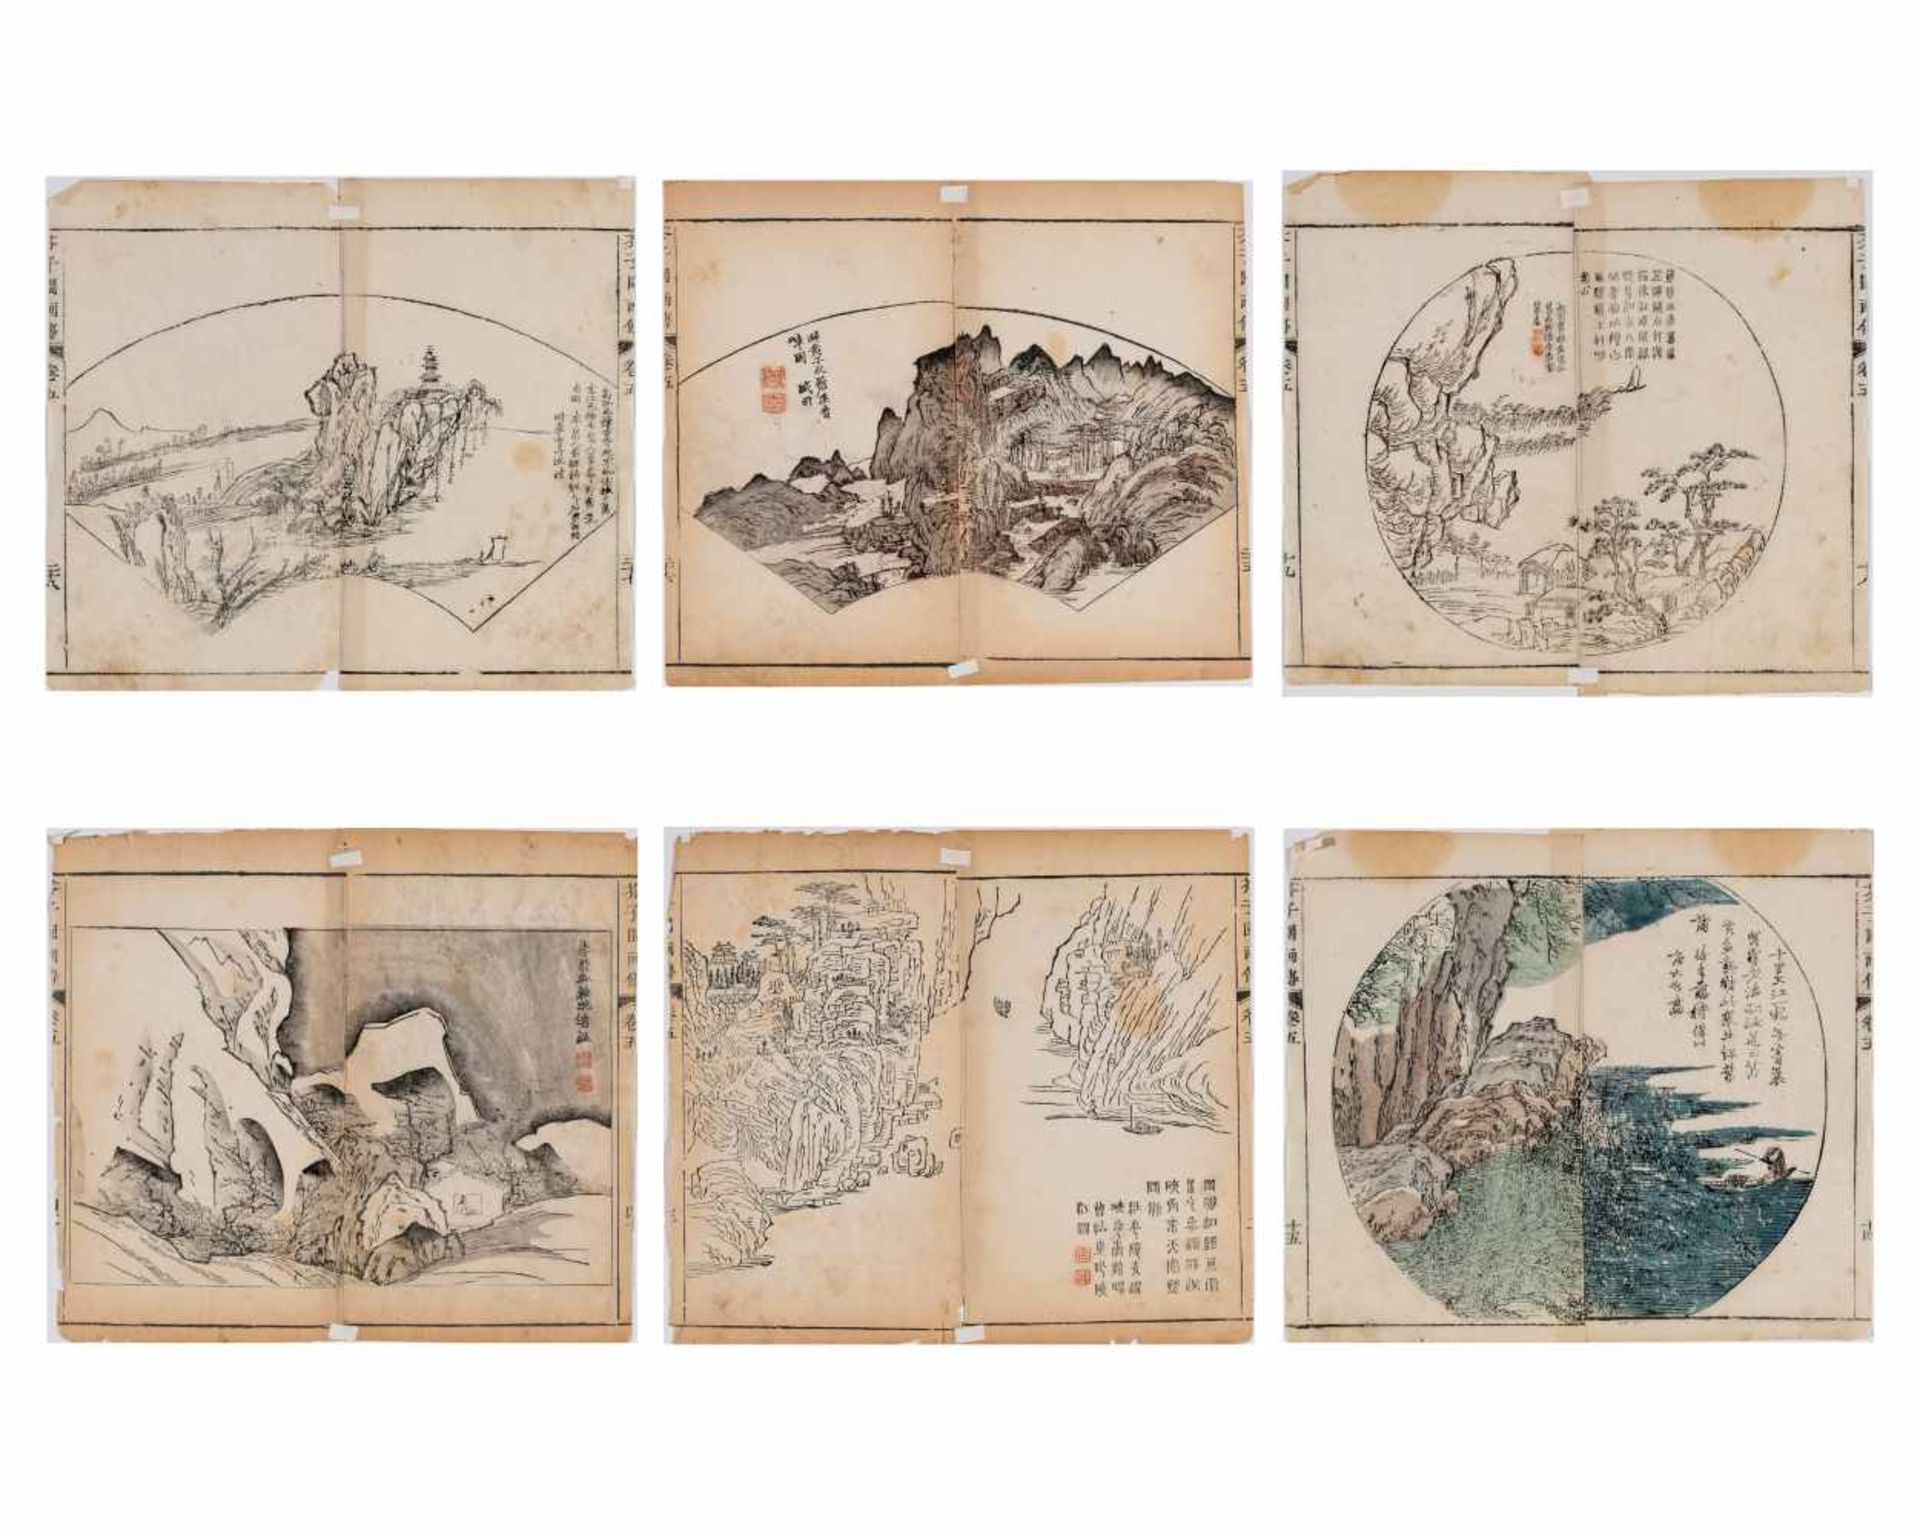 SIX CHINESE COLOR WOODBLOCK PRINTS, 18th CENTURYColor woodblock printsChina, 18th centuryThe six